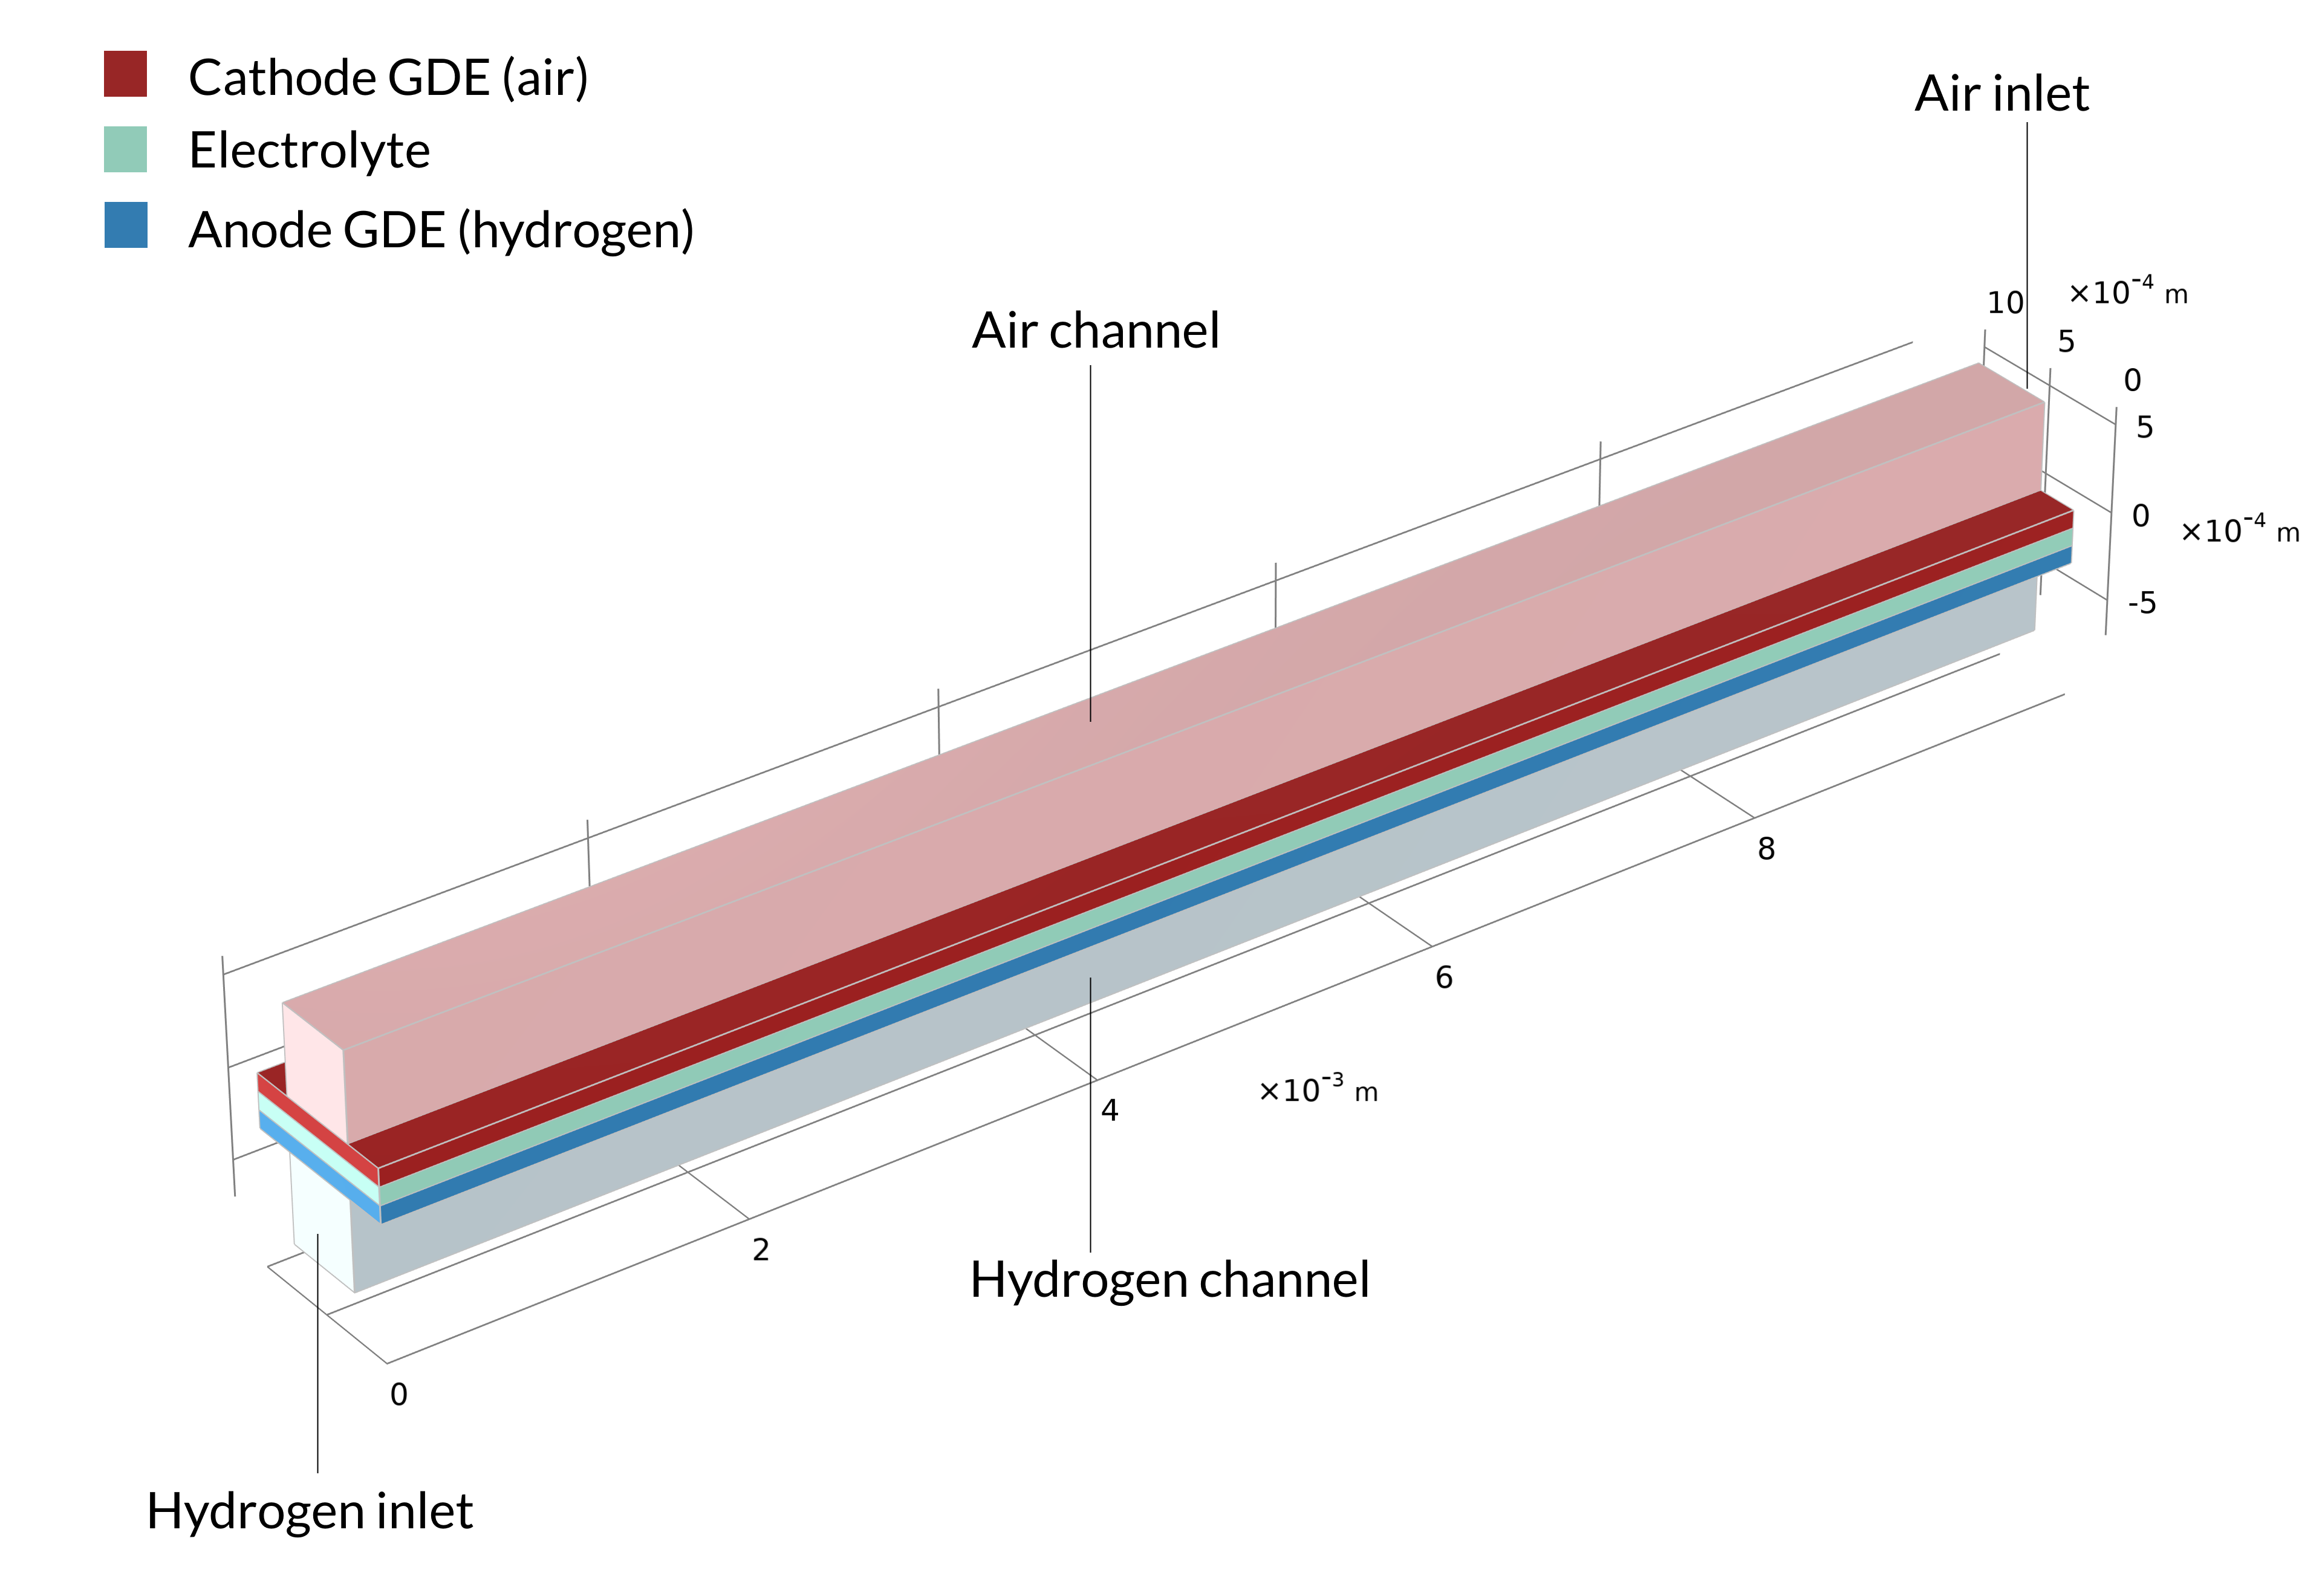 The geometry of a unit cell of a parallel channel solid oxide fuel cell with the air channel, hydrogen channel, air inlet, and hydrogen inlet labeled.